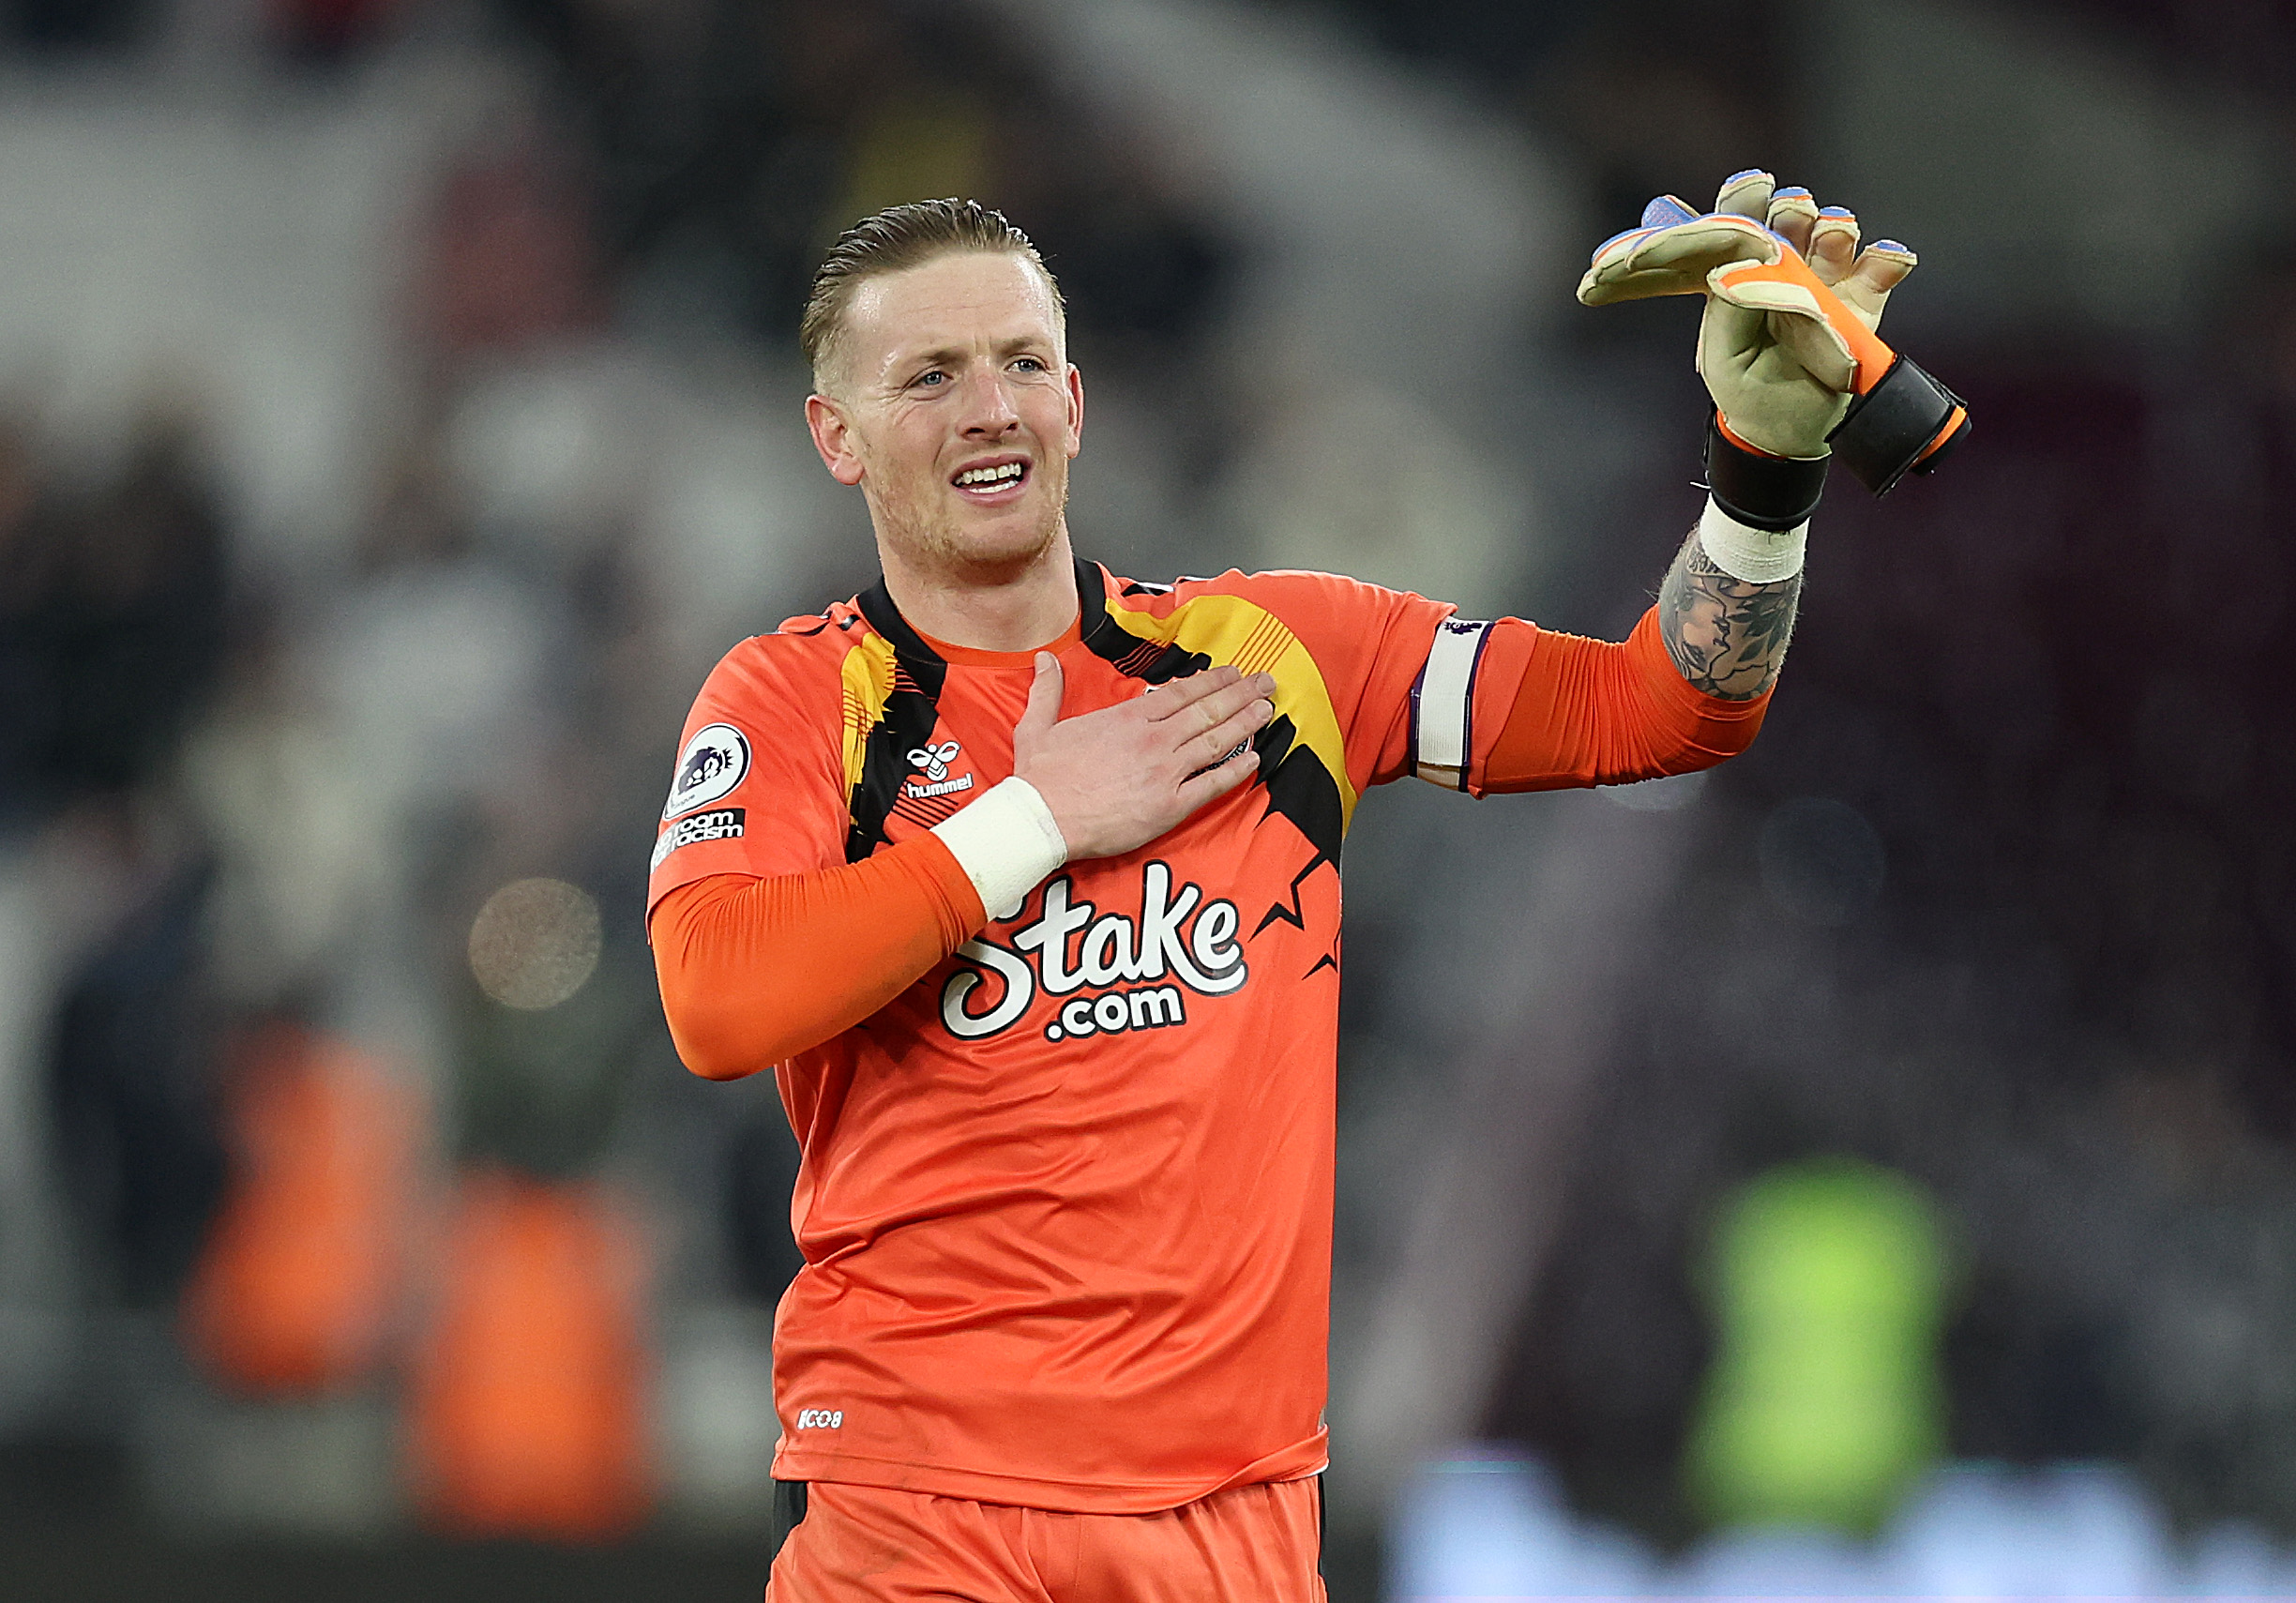 Jordan Pickford of Everton thanks the fans after the Premier League match between West Ham United and Everton FC at London Stadium on January 21, 2023 in London, England